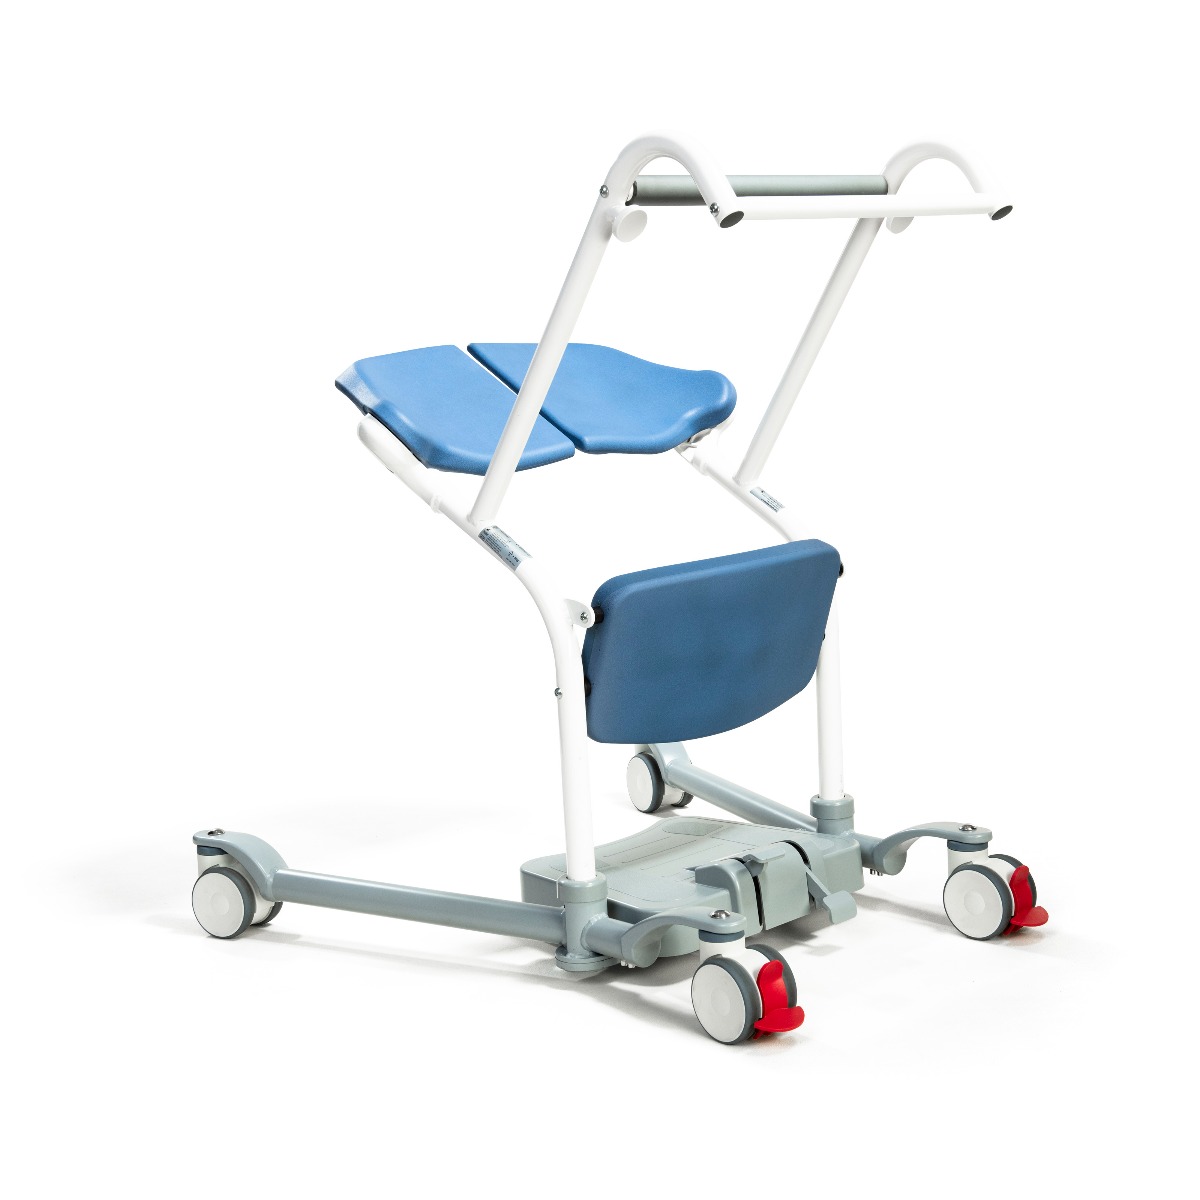 Able Assist Patient Transfer Aid WITH ADJUSTABLE LEGS